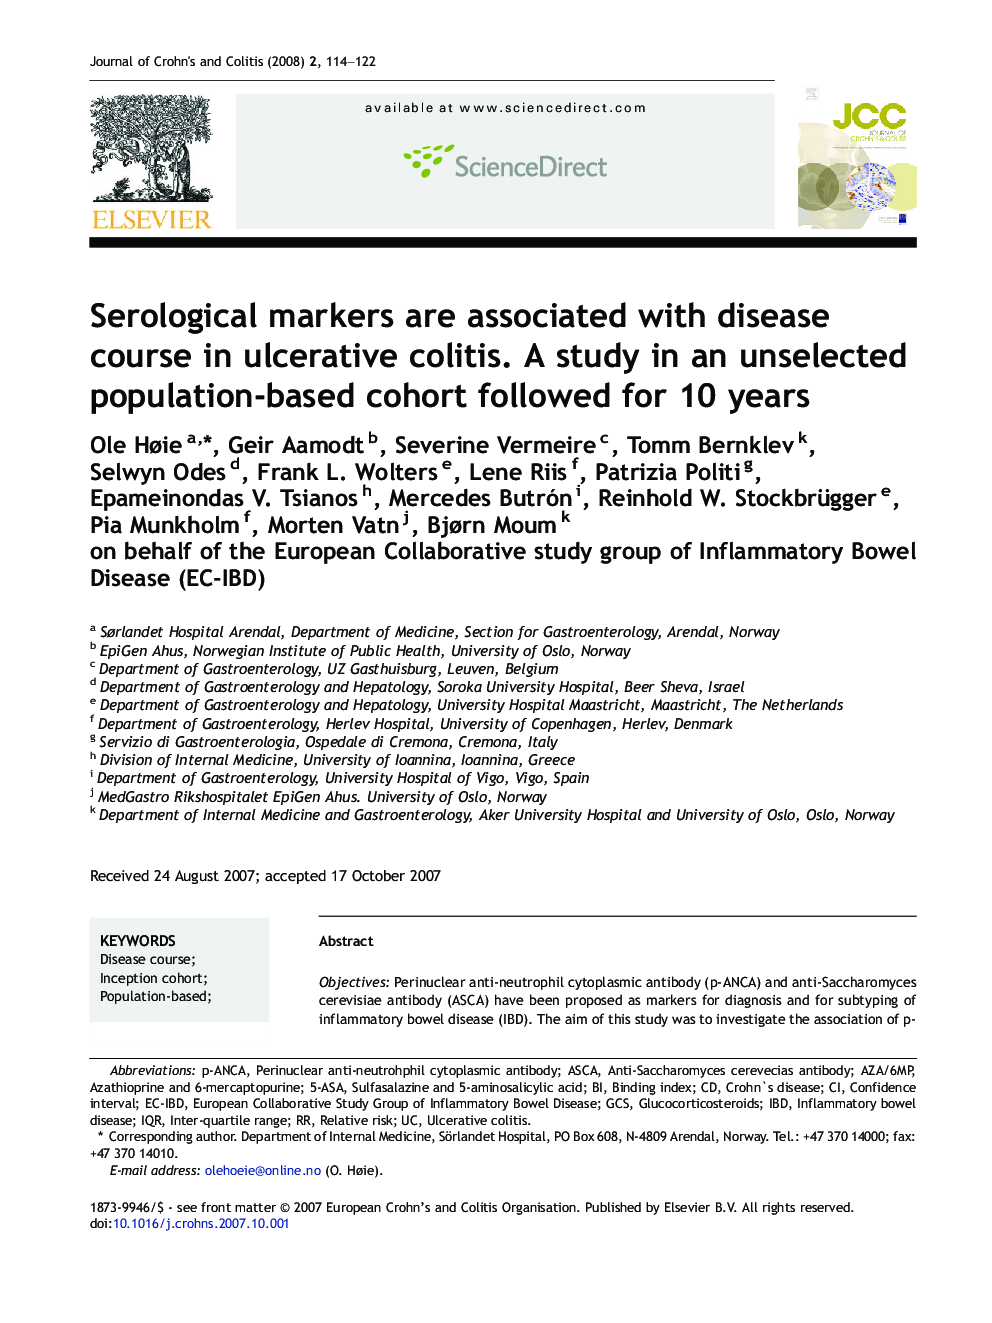 Serological markers are associated with disease course in ulcerative colitis. A study in an unselected population-based cohort followed for 10Â years